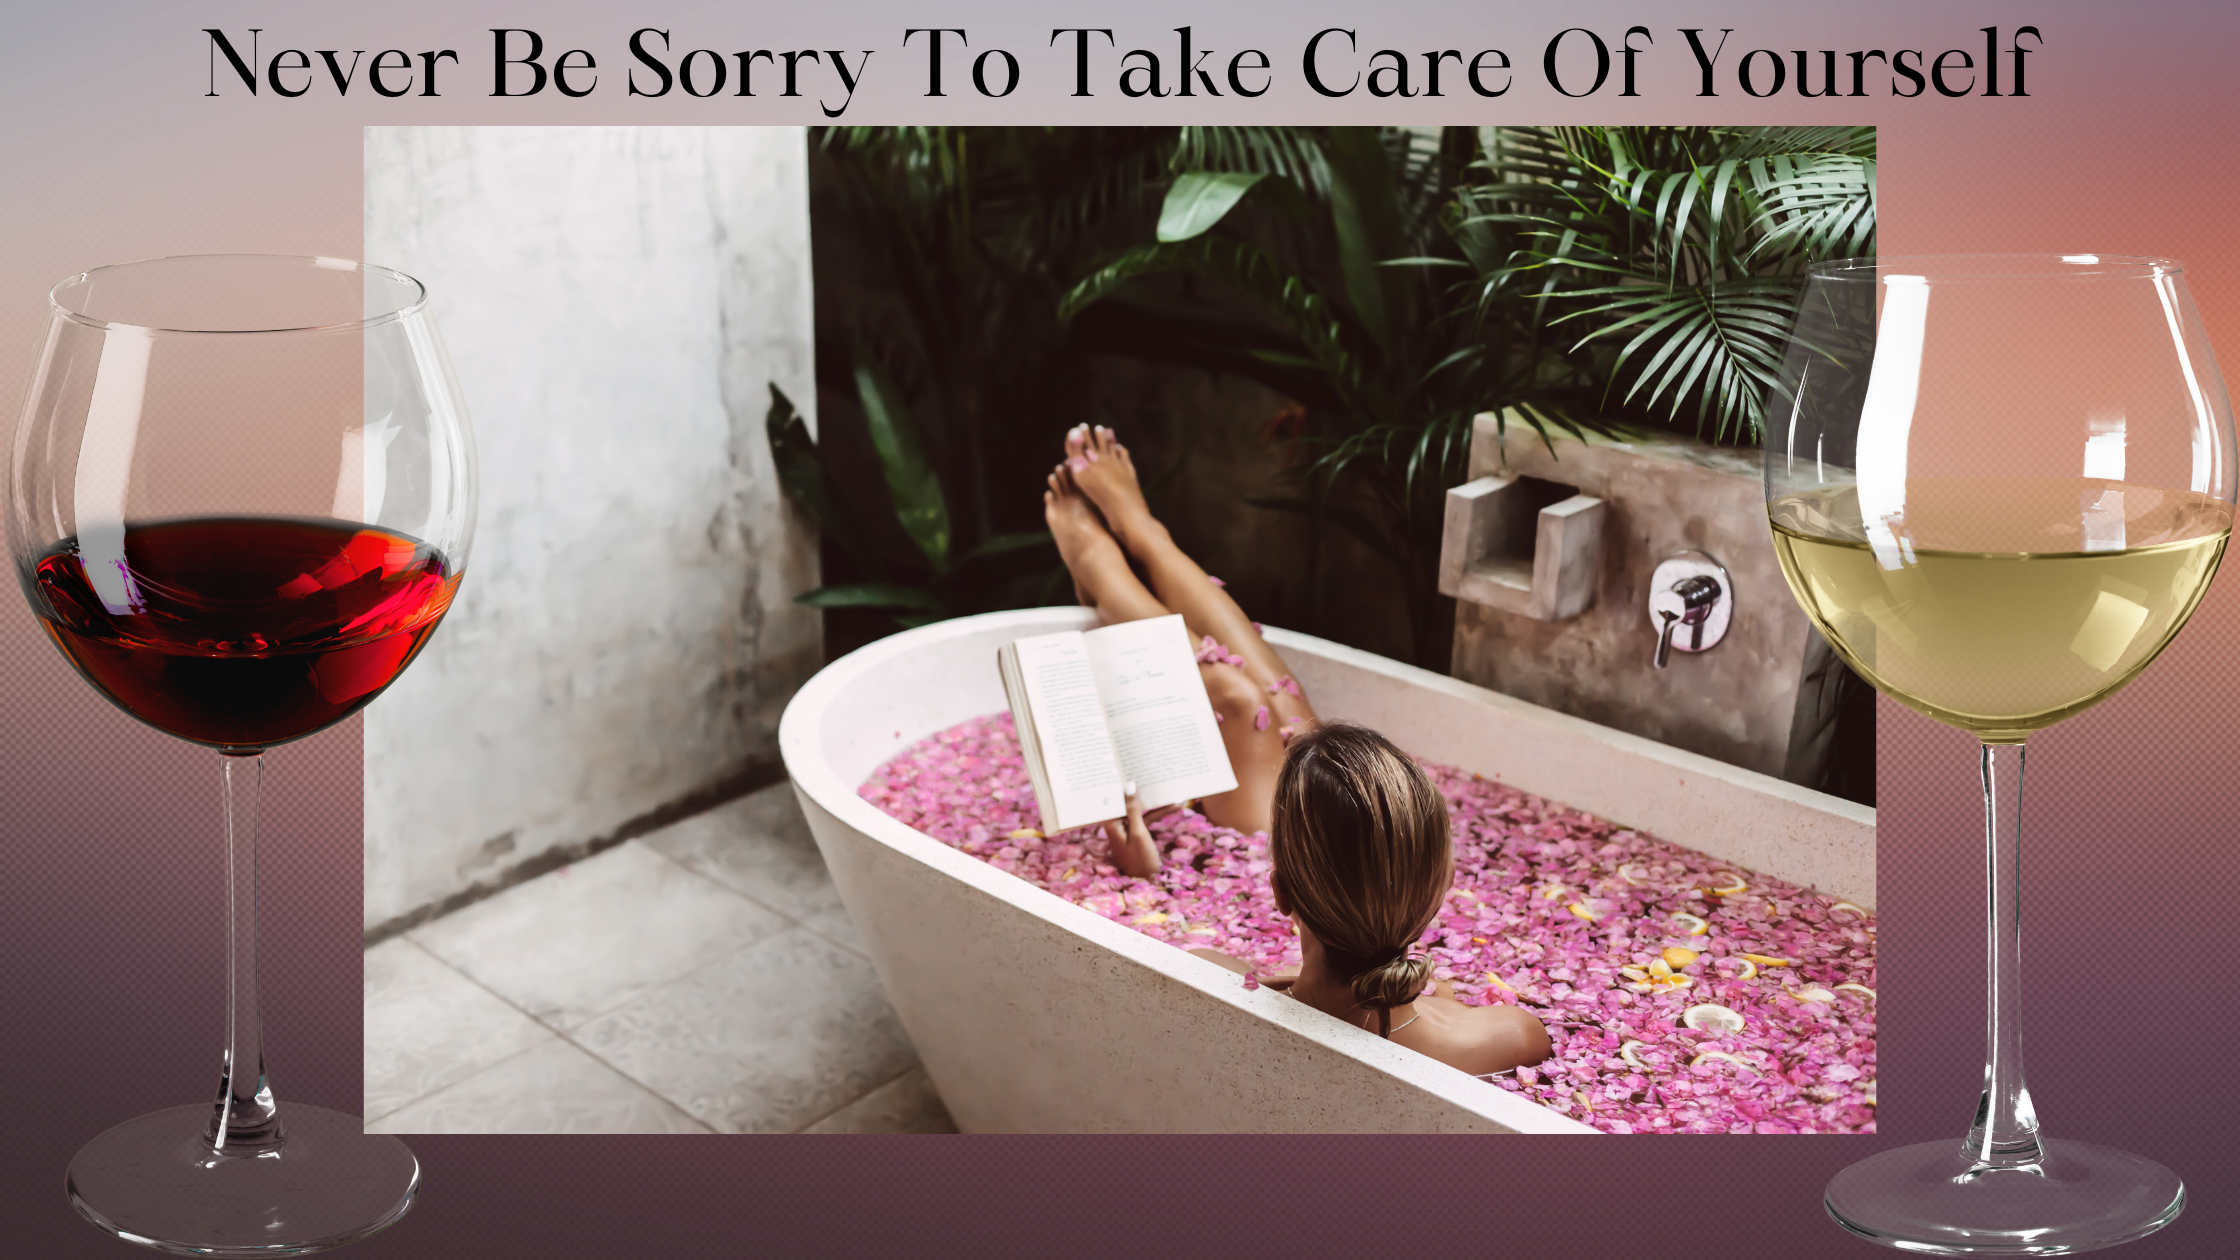 Never Be Sorry To Take Care Of Yourself